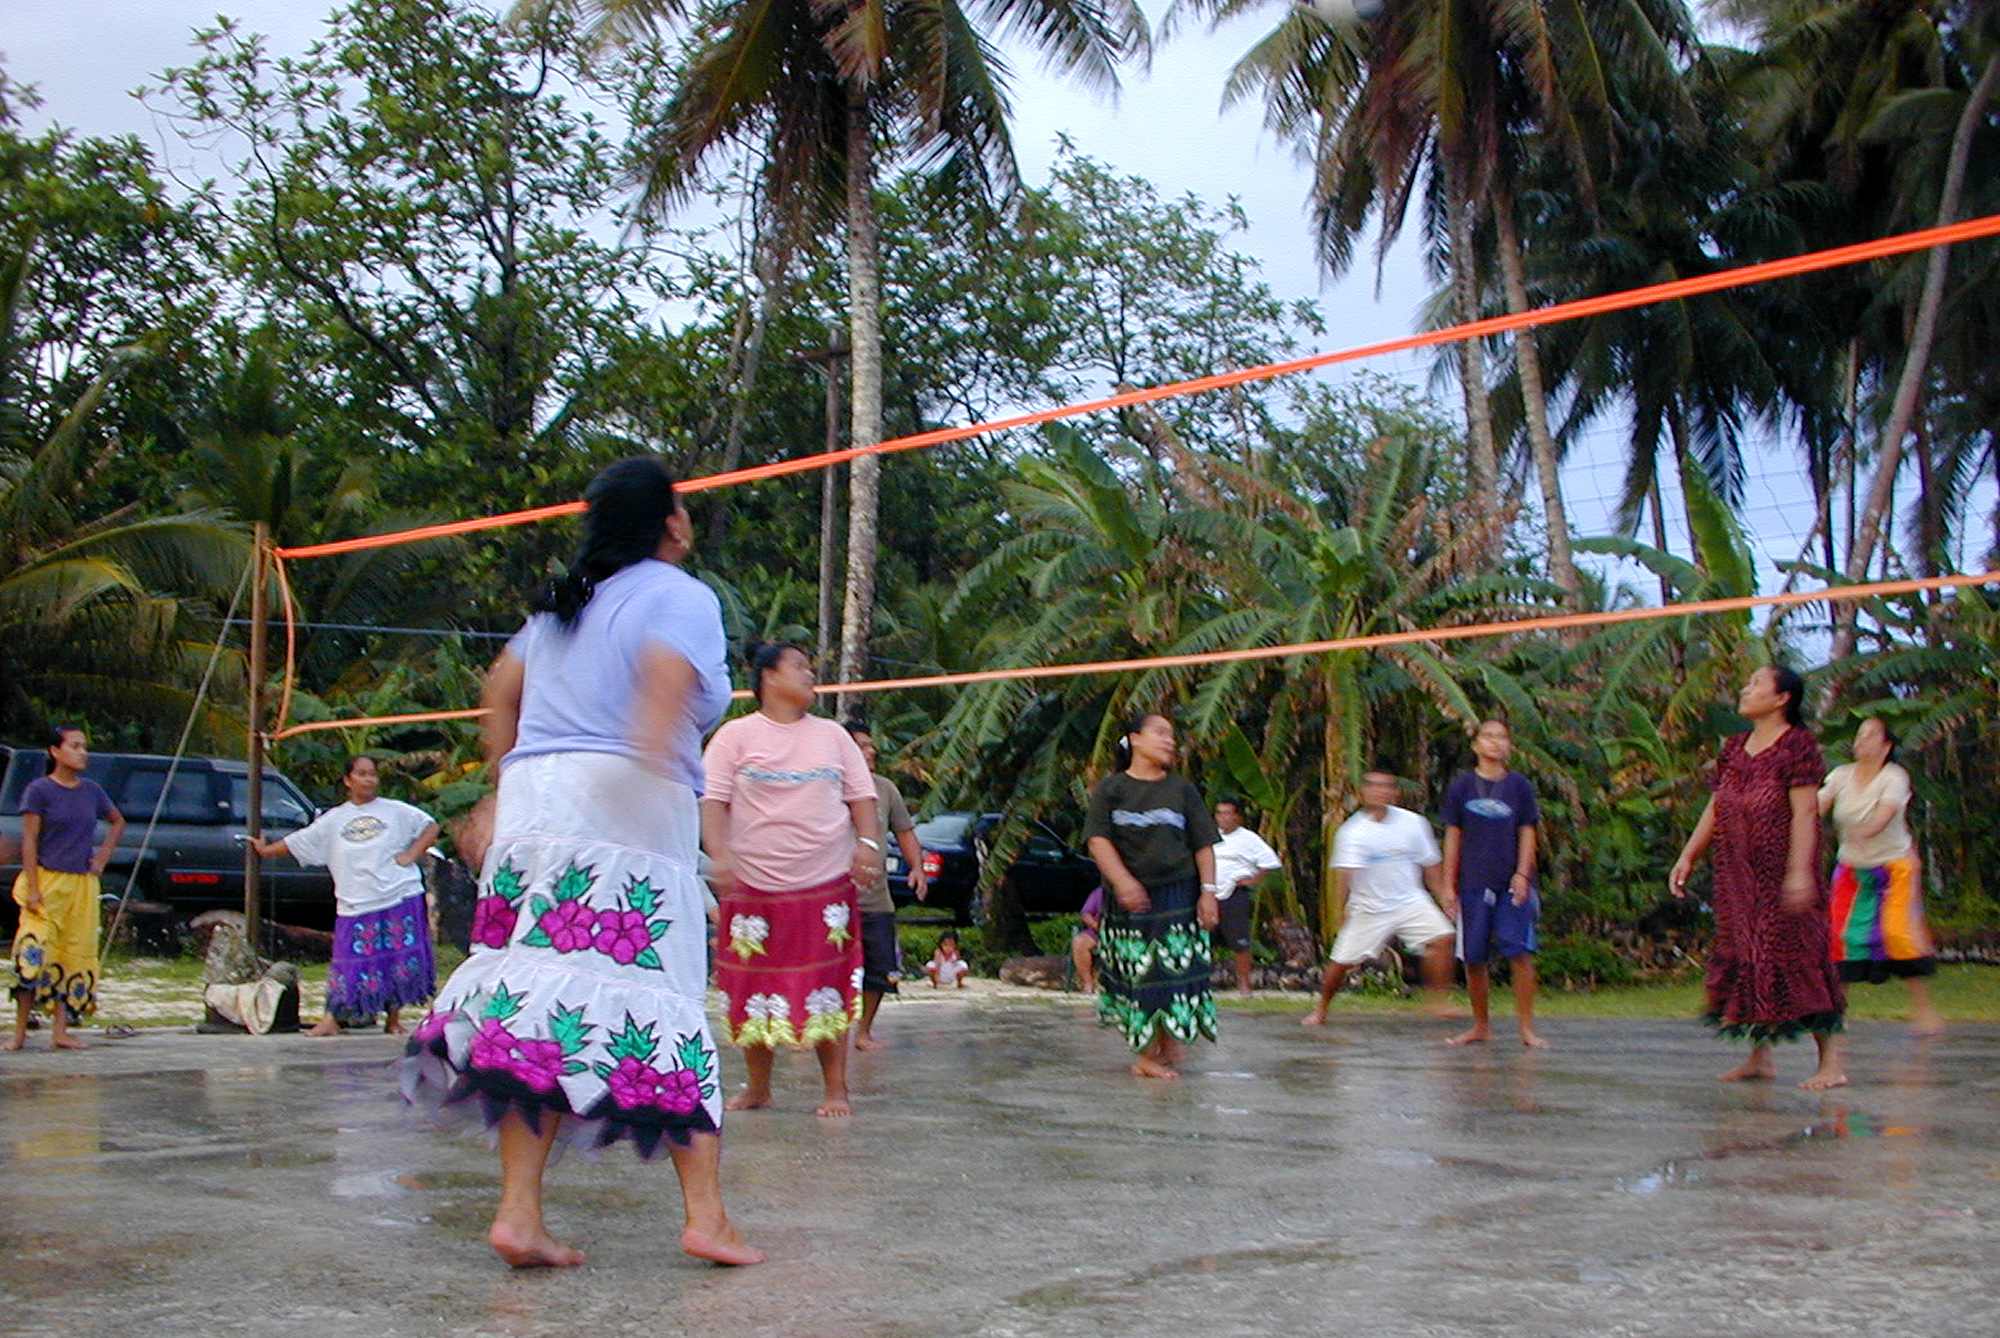 Women play volleyball on April 9, 2004, in Kosrae, Micronesia.